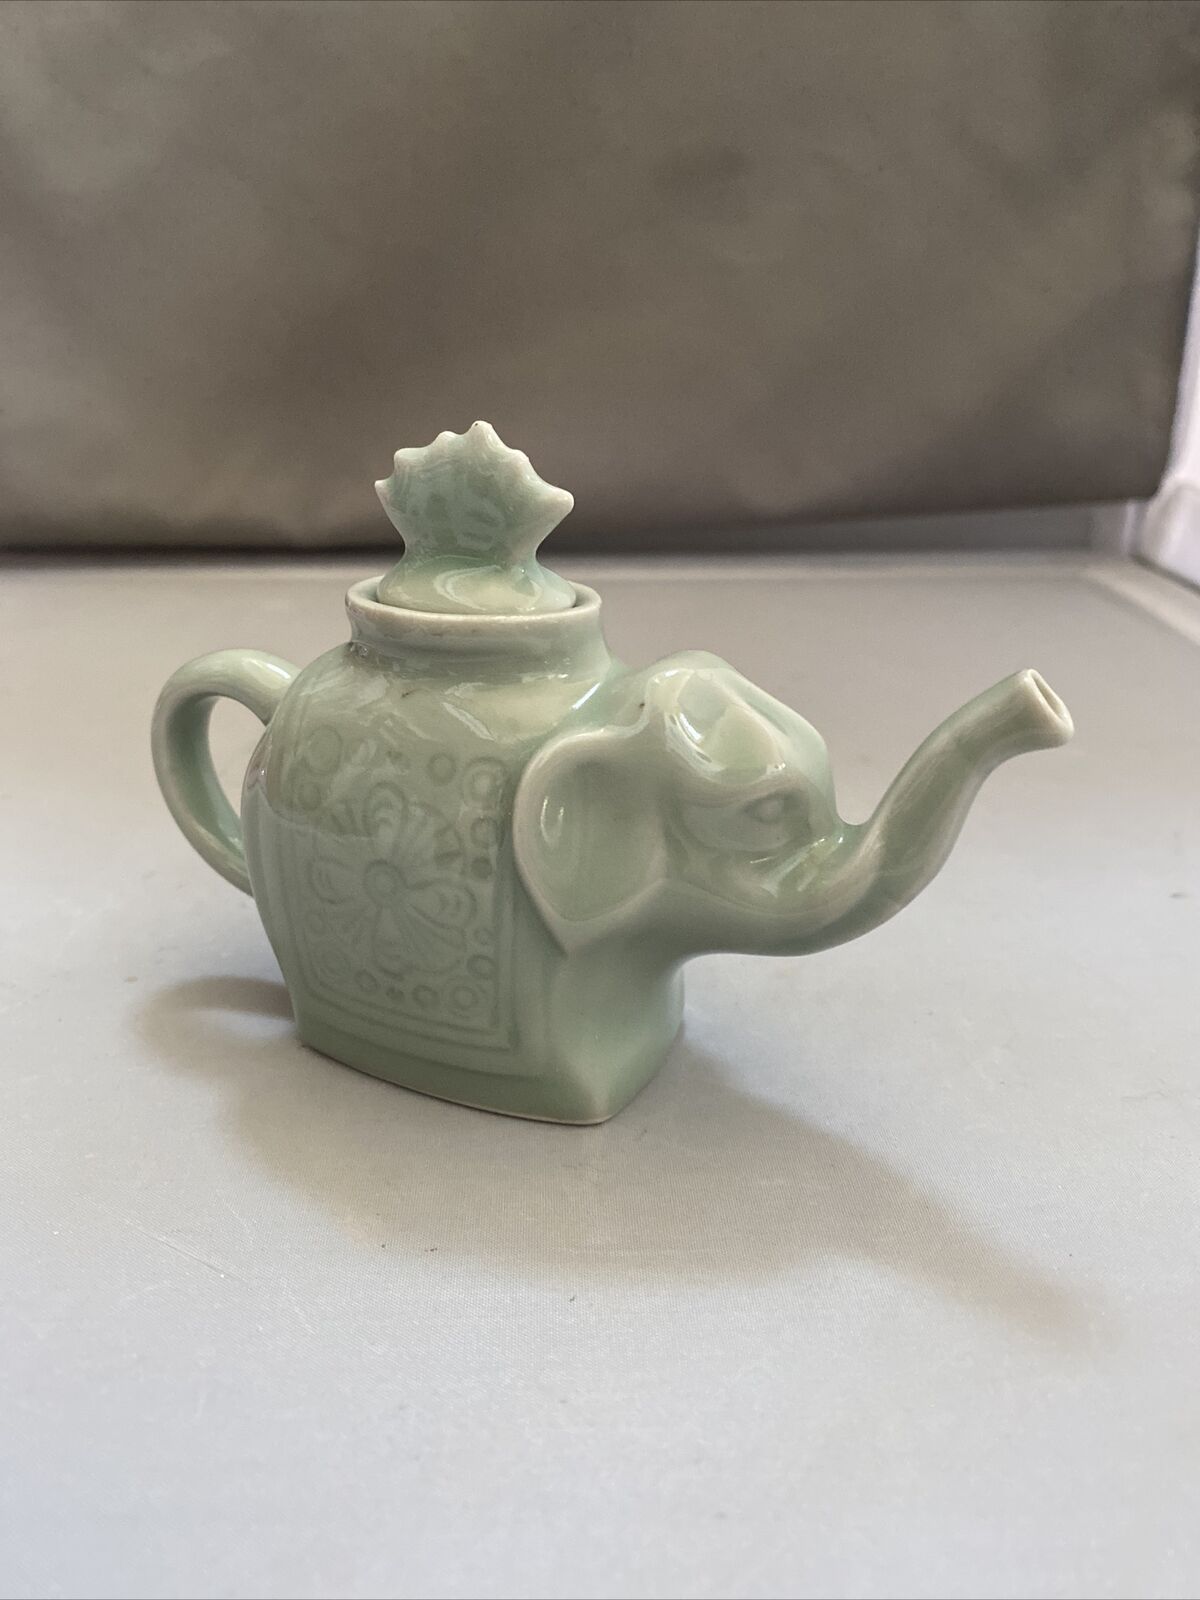 Vintage Celadon Porcelain Elephant Teapot 1950’s Made In China 3-1/2” Tall